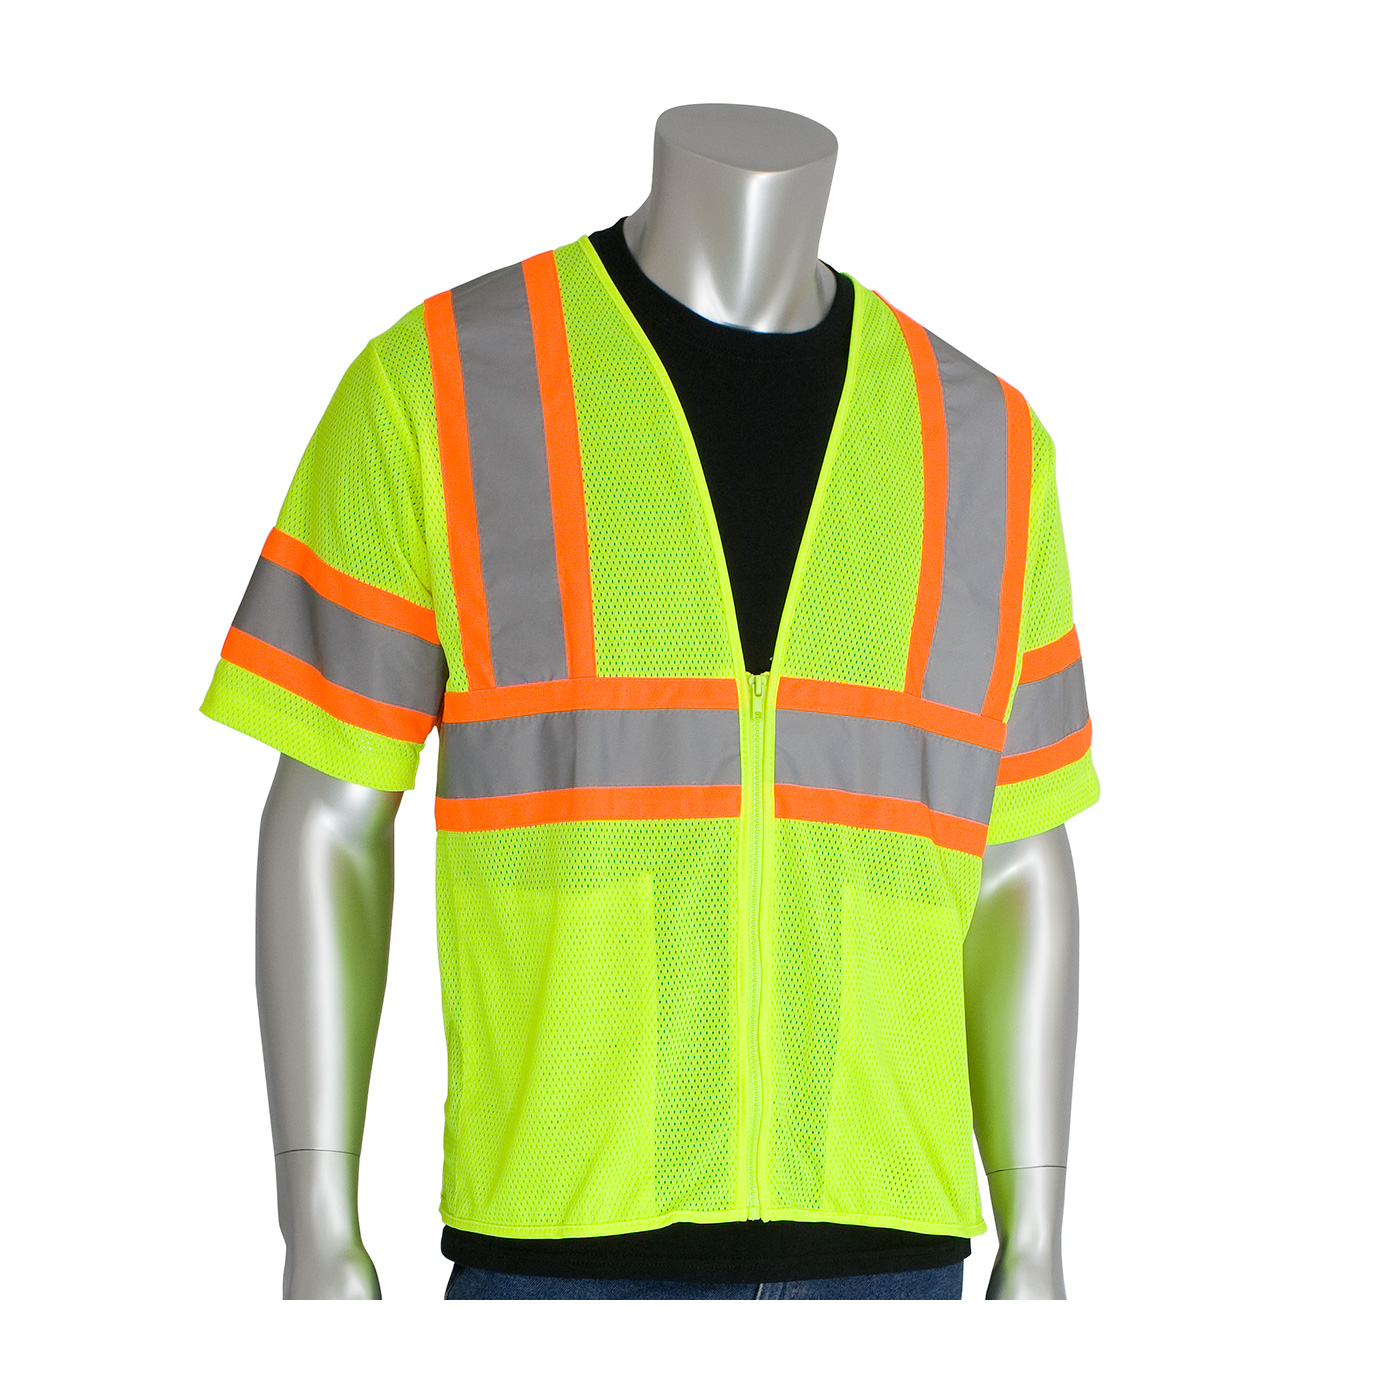 PIP Class 3 Safety Vest with Zipper - Clothing